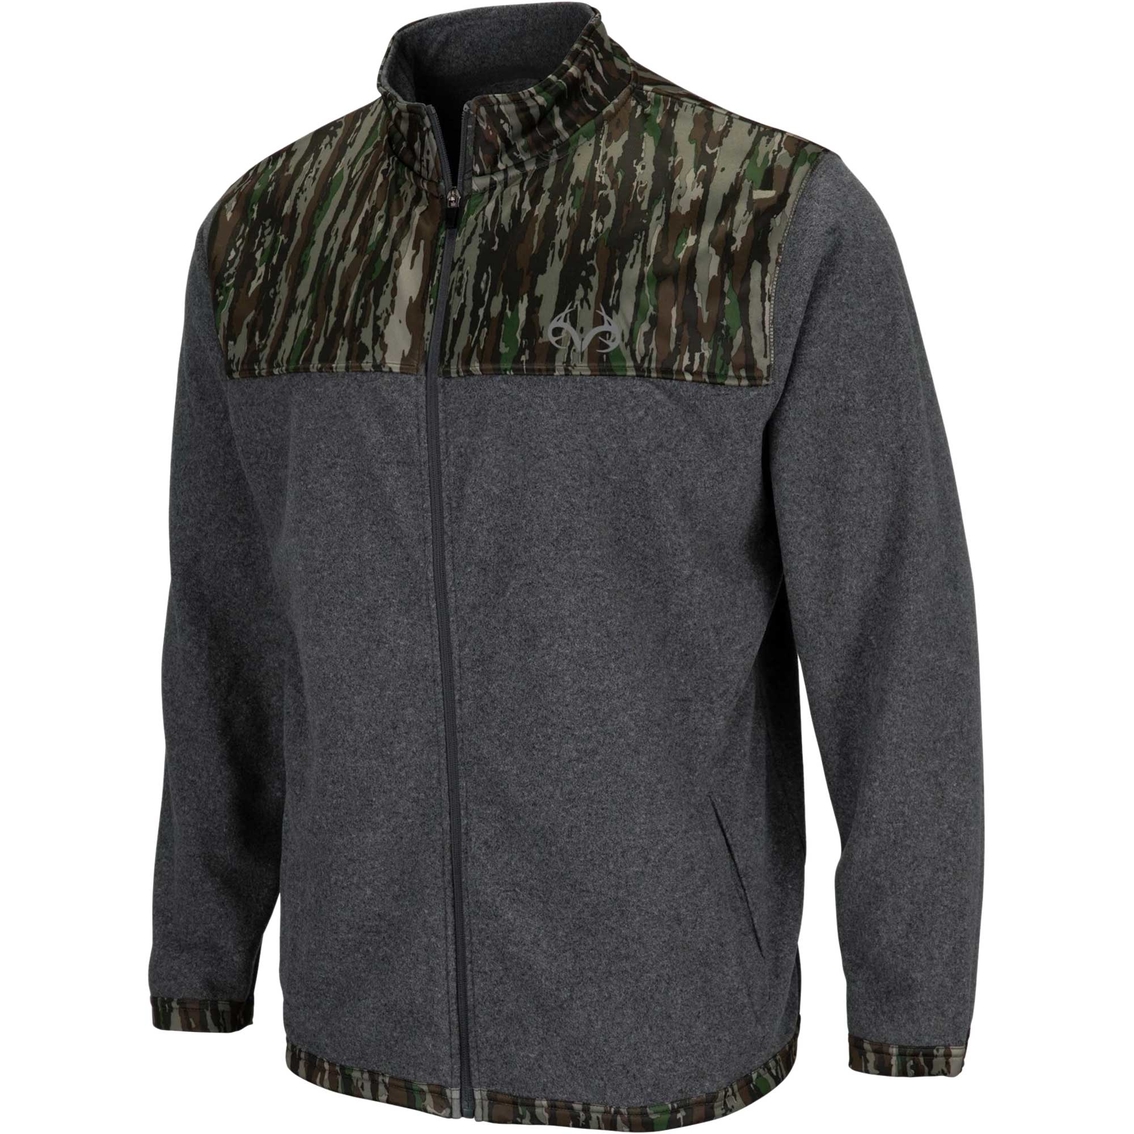 Realtree Original Fleece Pullover | Shirts | Clothing & Accessories